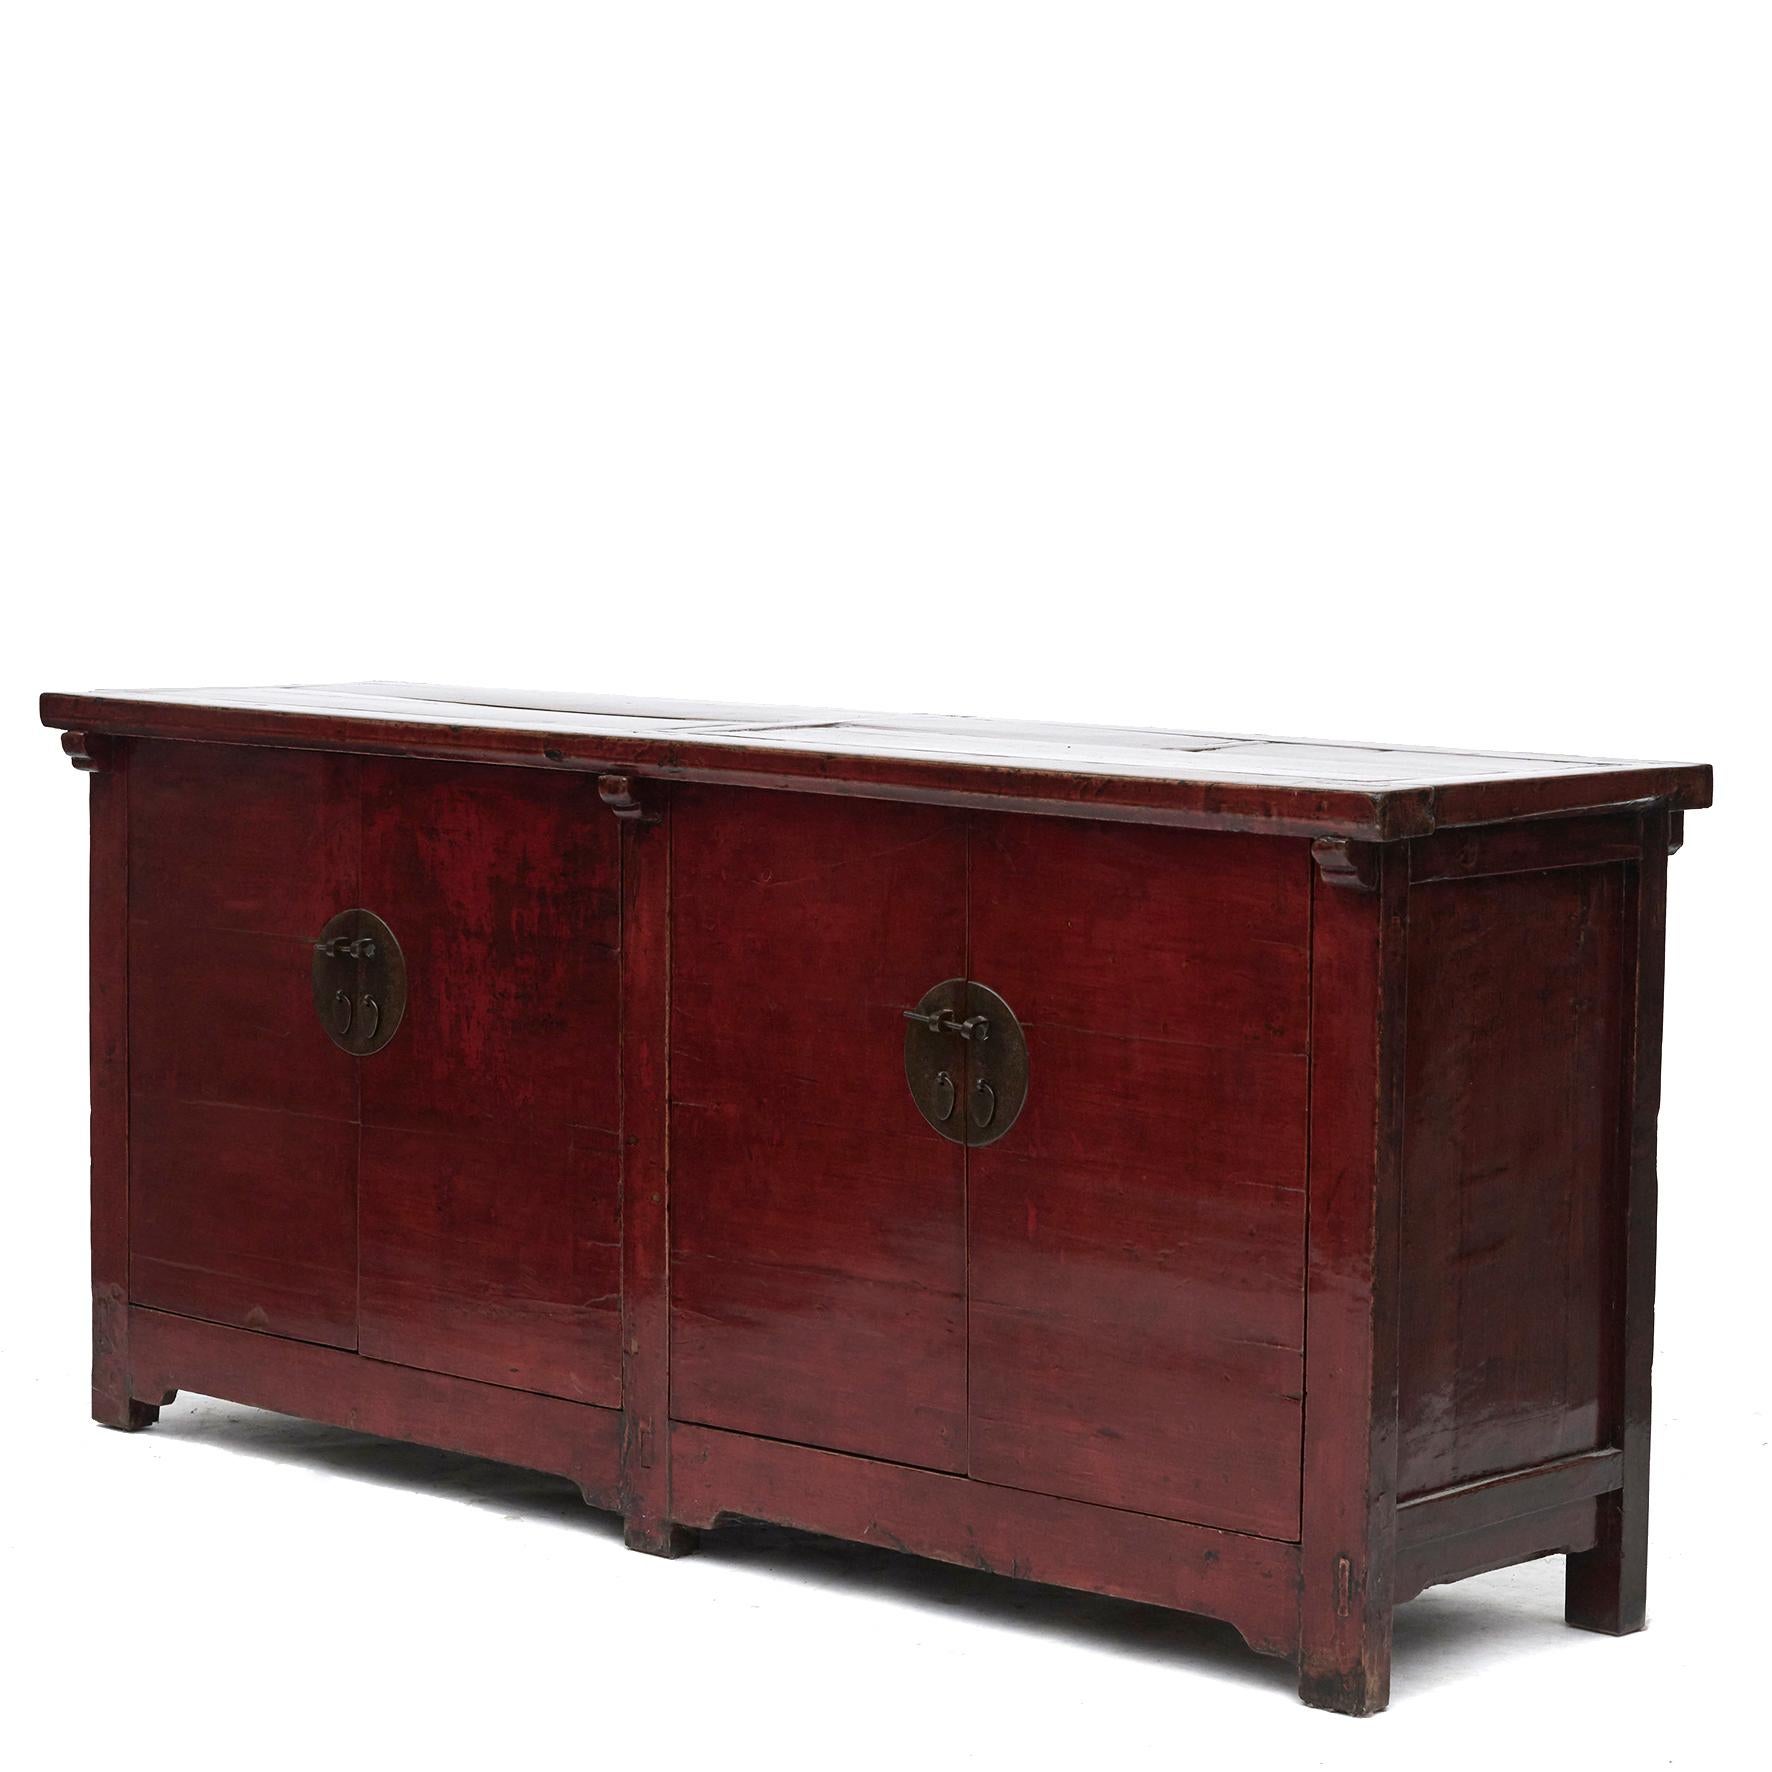 Sideboard with 2 pairs of doors, made of elm wood.
Original red lacquer with natural age-related beautiful patina, highlighted by a clear lacquer surface finish.

Shanxi Province 1850 - 1870.